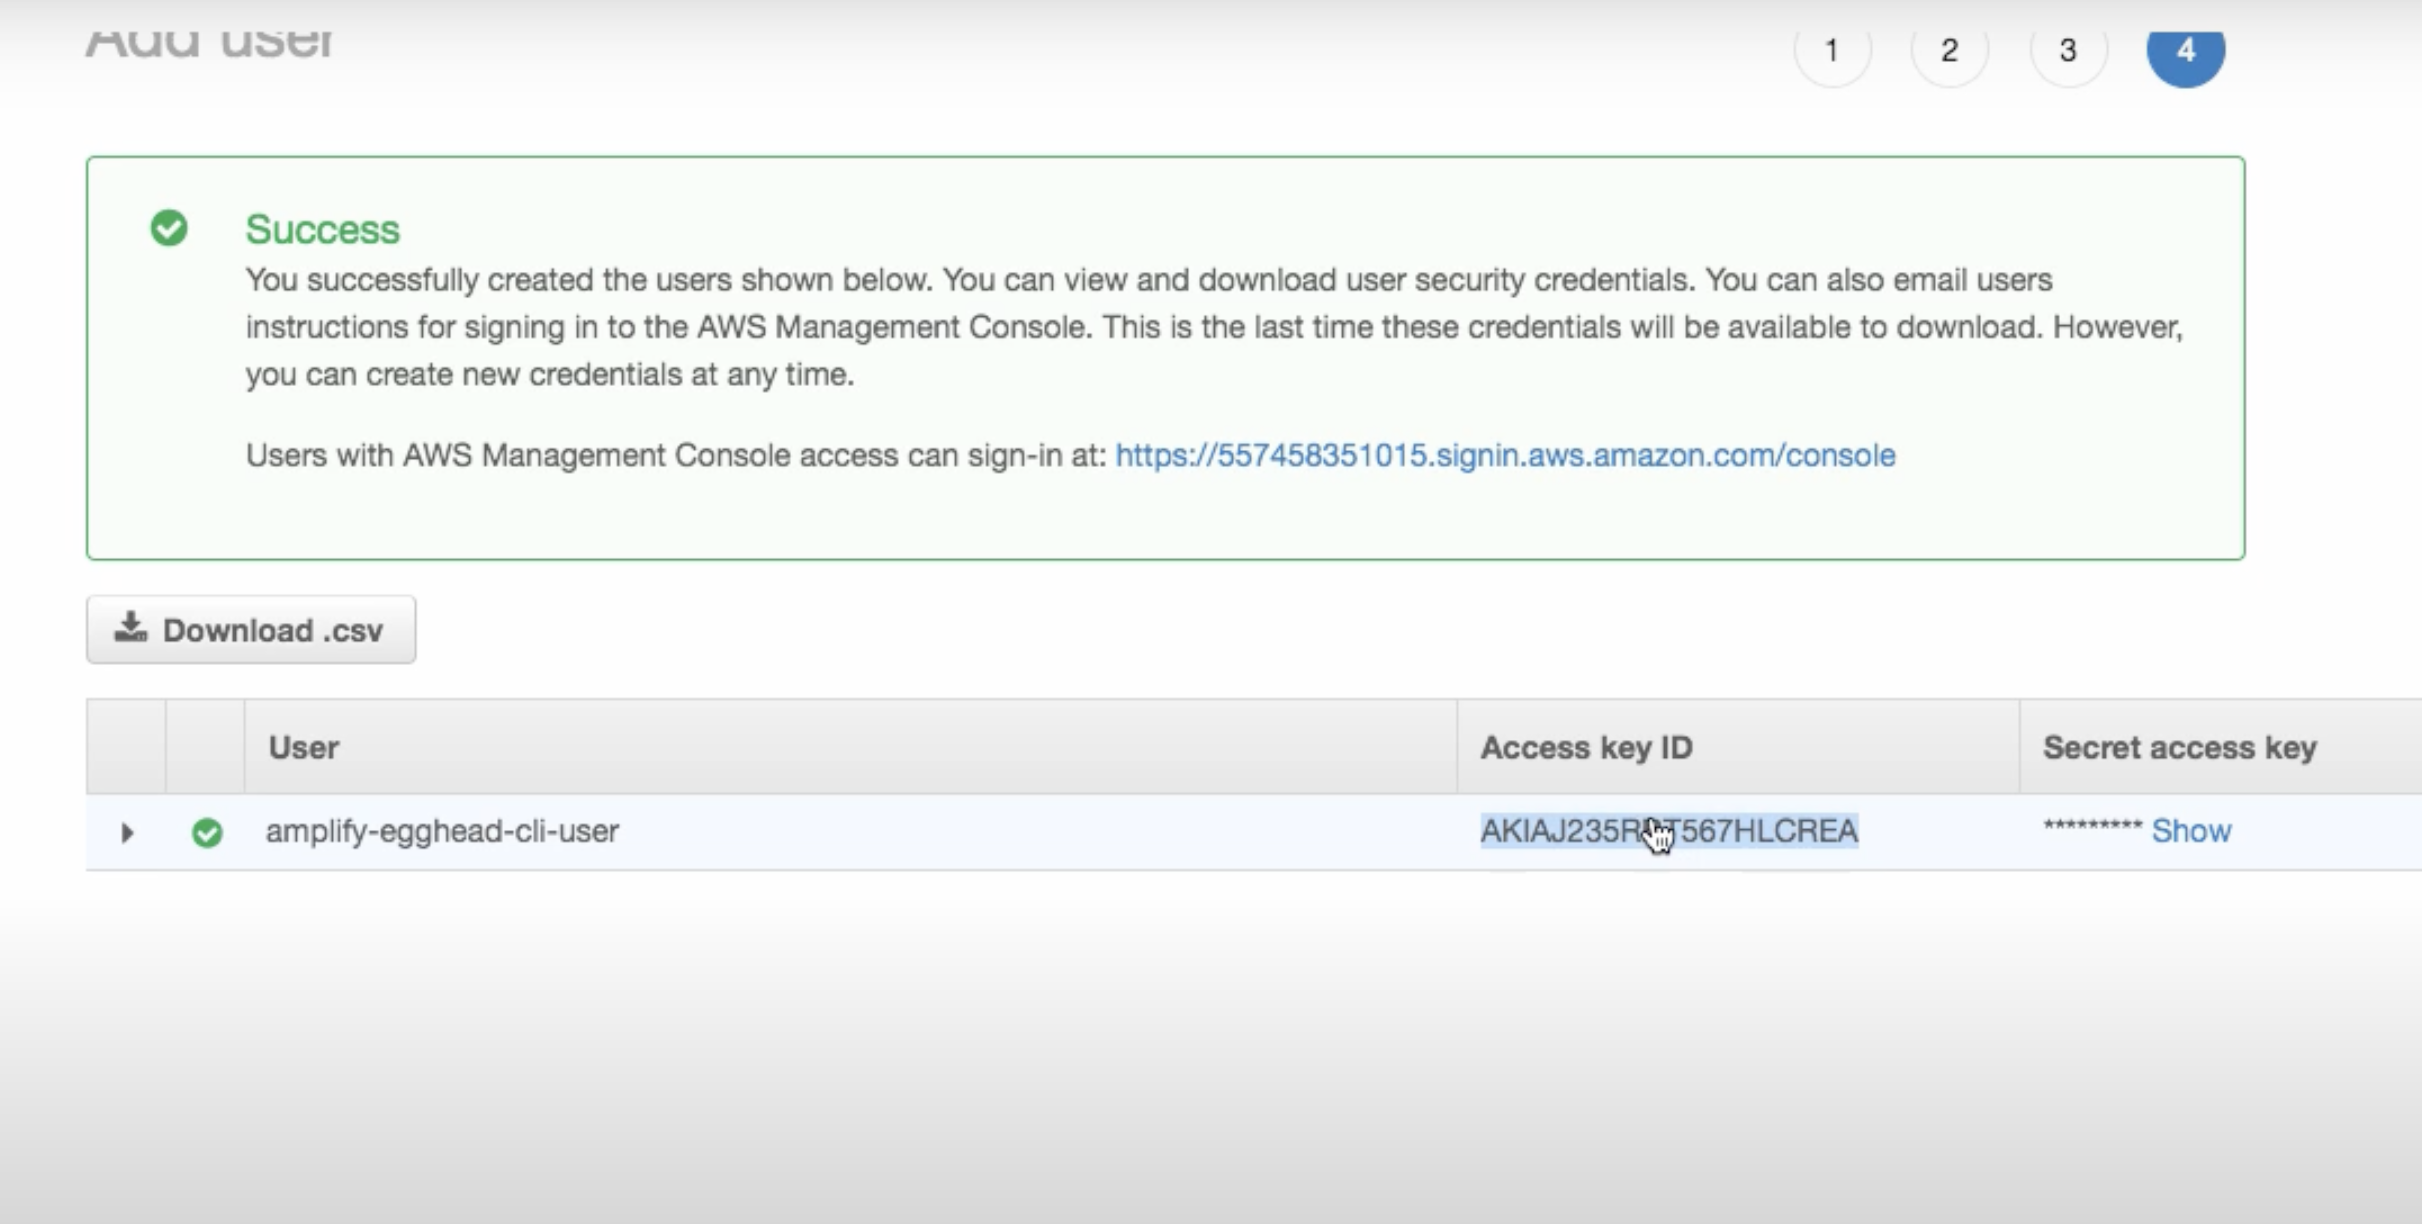 AWS amplify access code and secret key